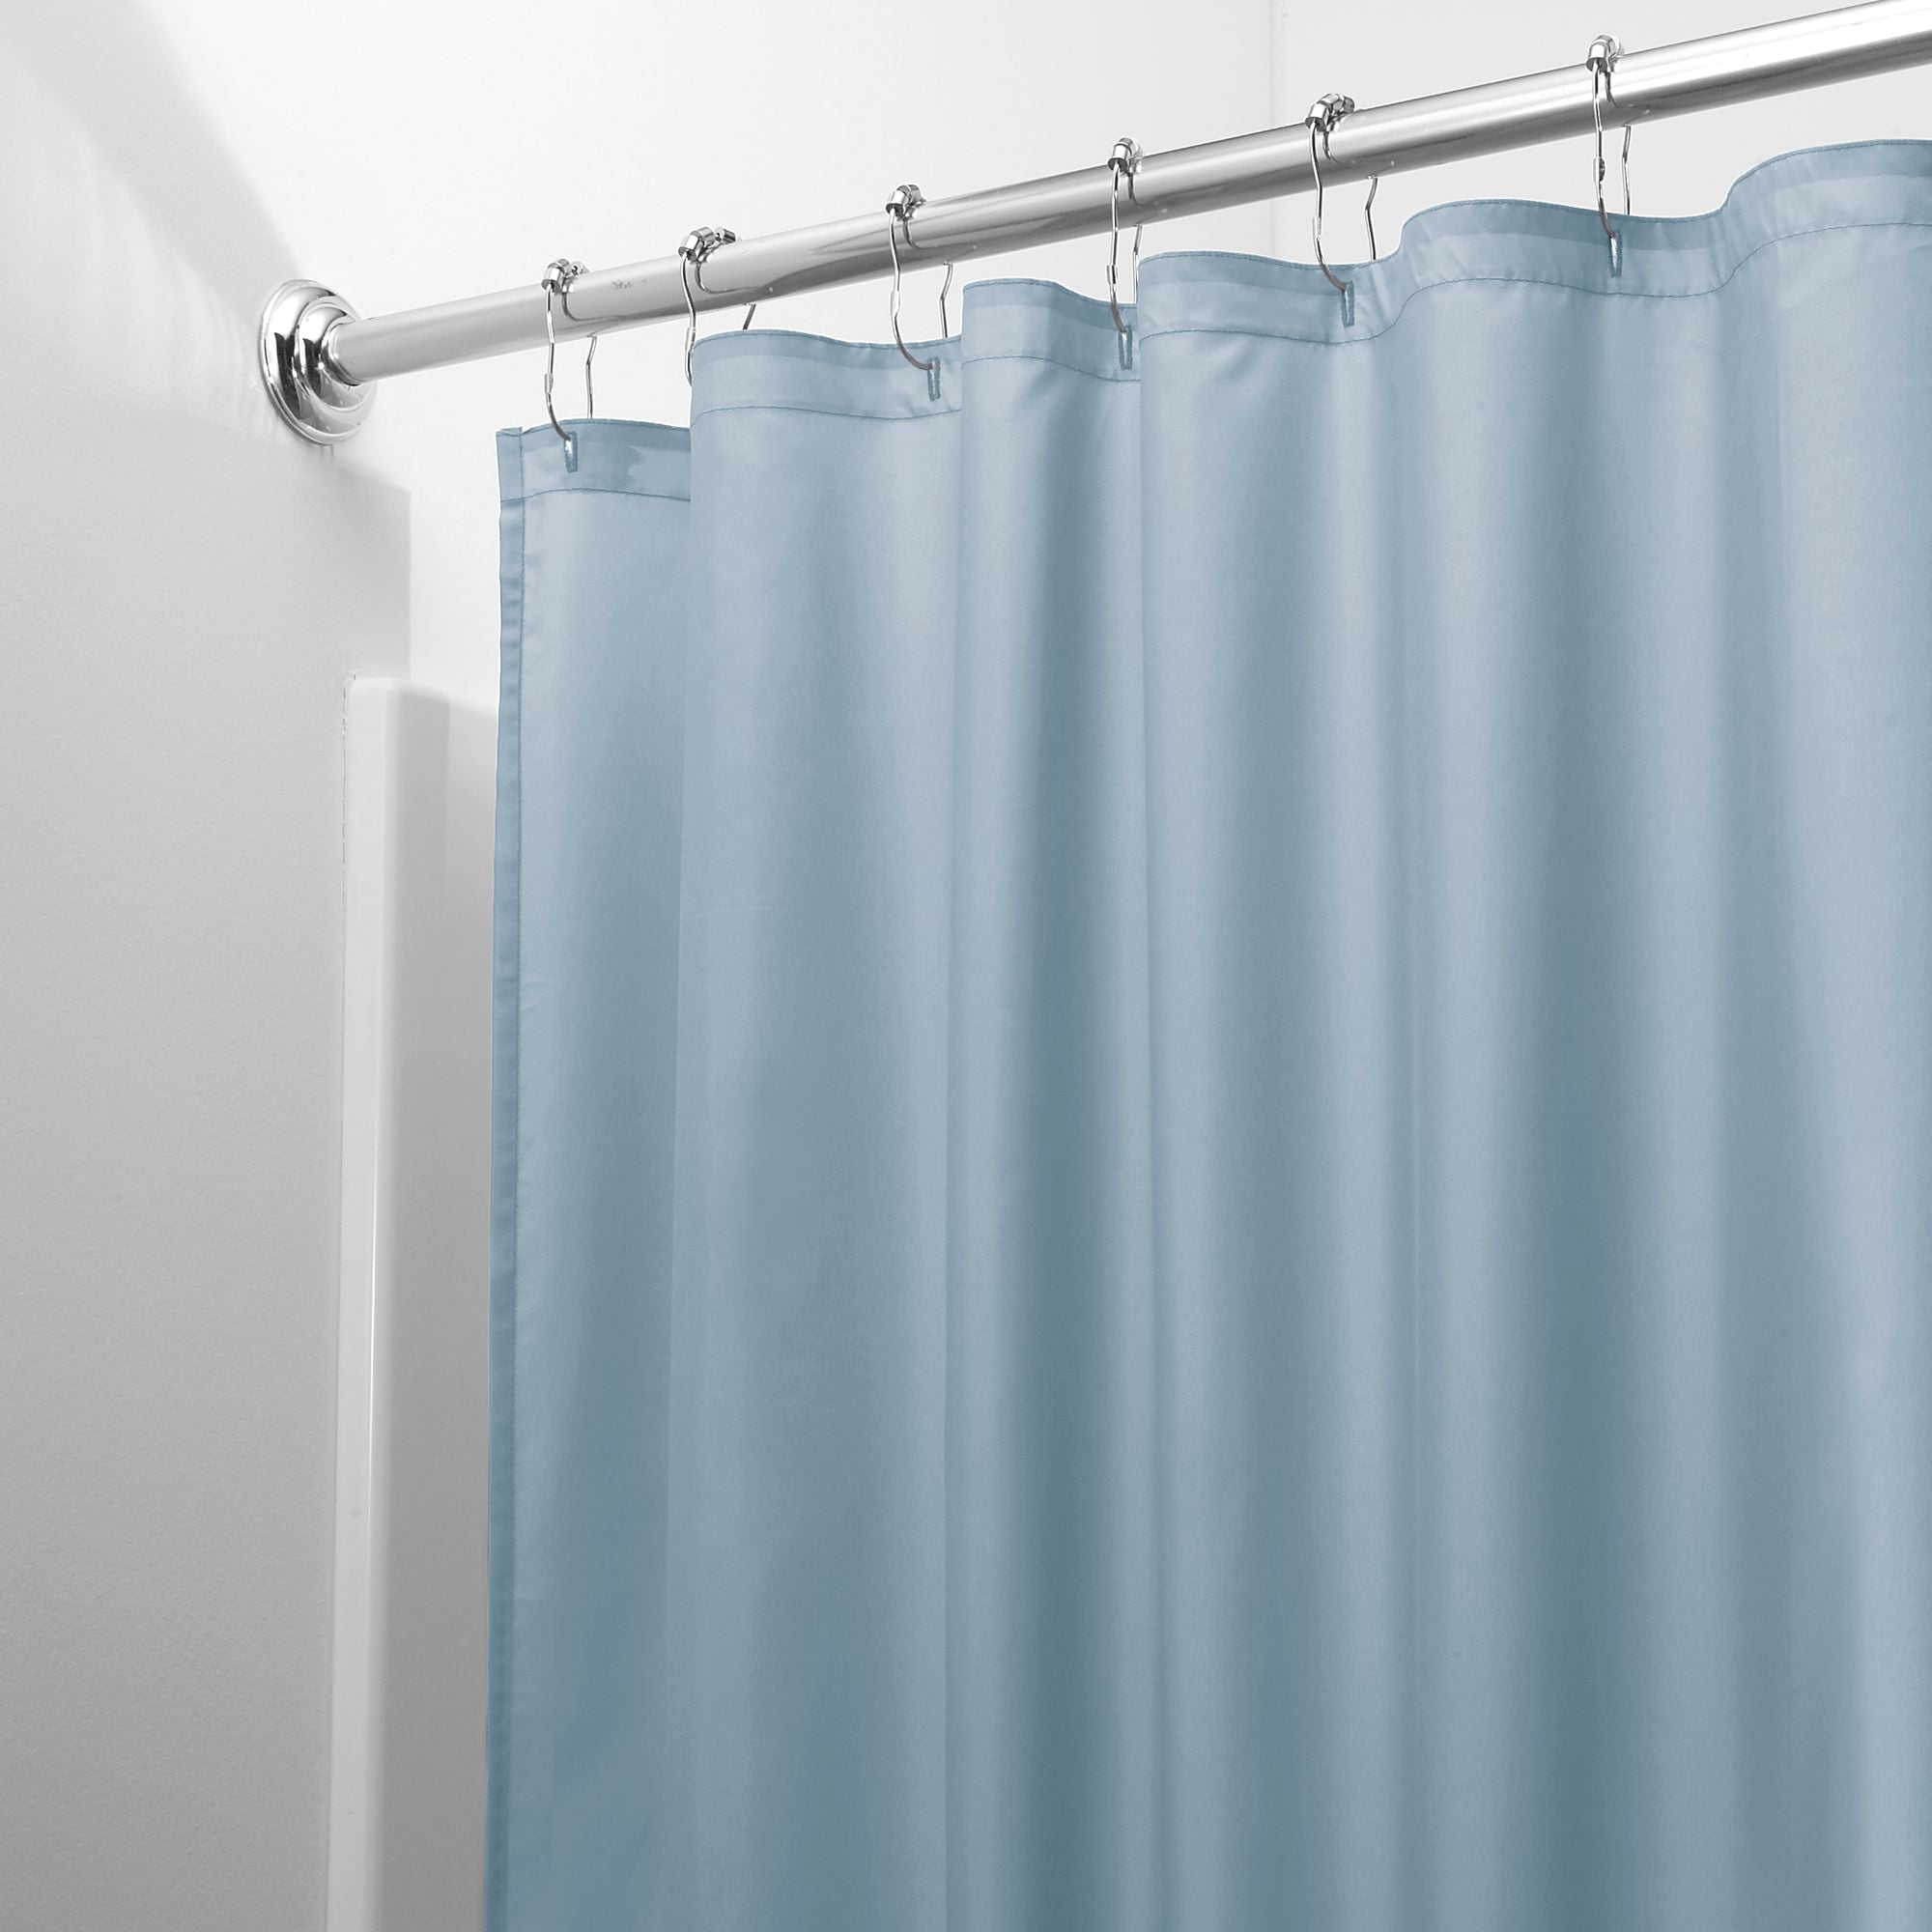 72" x 72" Details about   ImDesign Linear Print Fabric Shower Curtain 